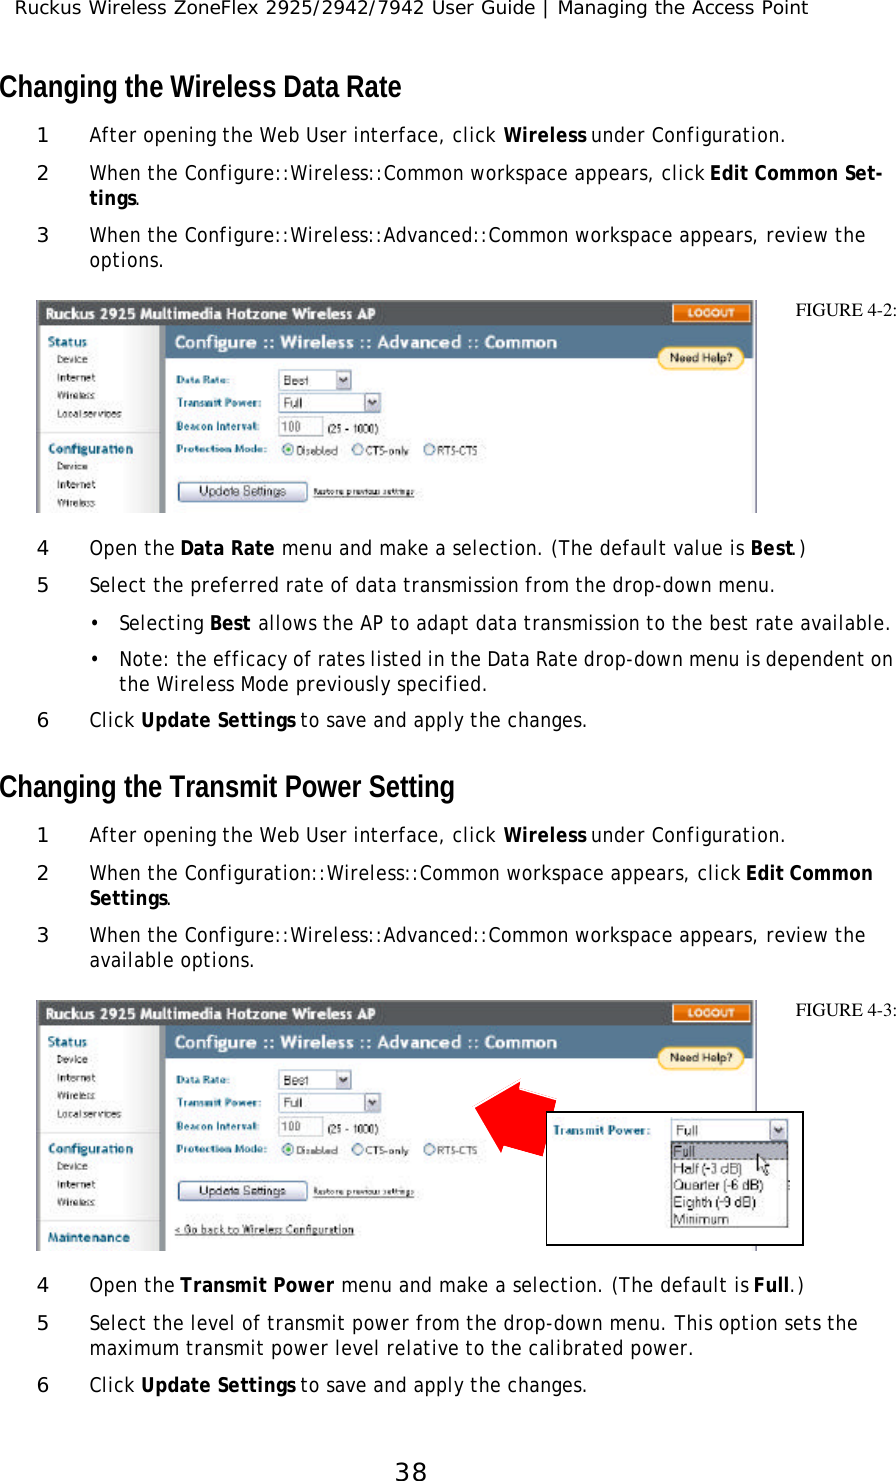 Ruckus Wireless ZoneFlex 2925/2942/7942 User Guide | Managing the Access Point38Changing the Wireless Data Rate1After opening the Web User interface, click Wireless under Configuration.2When the Configure::Wireless::Common workspace appears, click Edit Common Set-tings.3When the Configure::Wireless::Advanced::Common workspace appears, review the options. 4Open the Data Rate menu and make a selection. (The default value is Best.) 5Select the preferred rate of data transmission from the drop-down menu. •Selecting Best allows the AP to adapt data transmission to the best rate available.•Note: the efficacy of rates listed in the Data Rate drop-down menu is dependent on the Wireless Mode previously specified.6Click Update Settings to save and apply the changes.Changing the Transmit Power Setting1After opening the Web User interface, click Wireless under Configuration.2When the Configuration::Wireless::Common workspace appears, click Edit Common Settings.3When the Configure::Wireless::Advanced::Common workspace appears, review the available options. 4Open the Transmit Power menu and make a selection. (The default is Full.) 5Select the level of transmit power from the drop-down menu. This option sets the maximum transmit power level relative to the calibrated power. 6Click Update Settings to save and apply the changes.FIGURE 4-2:FIGURE 4-3: